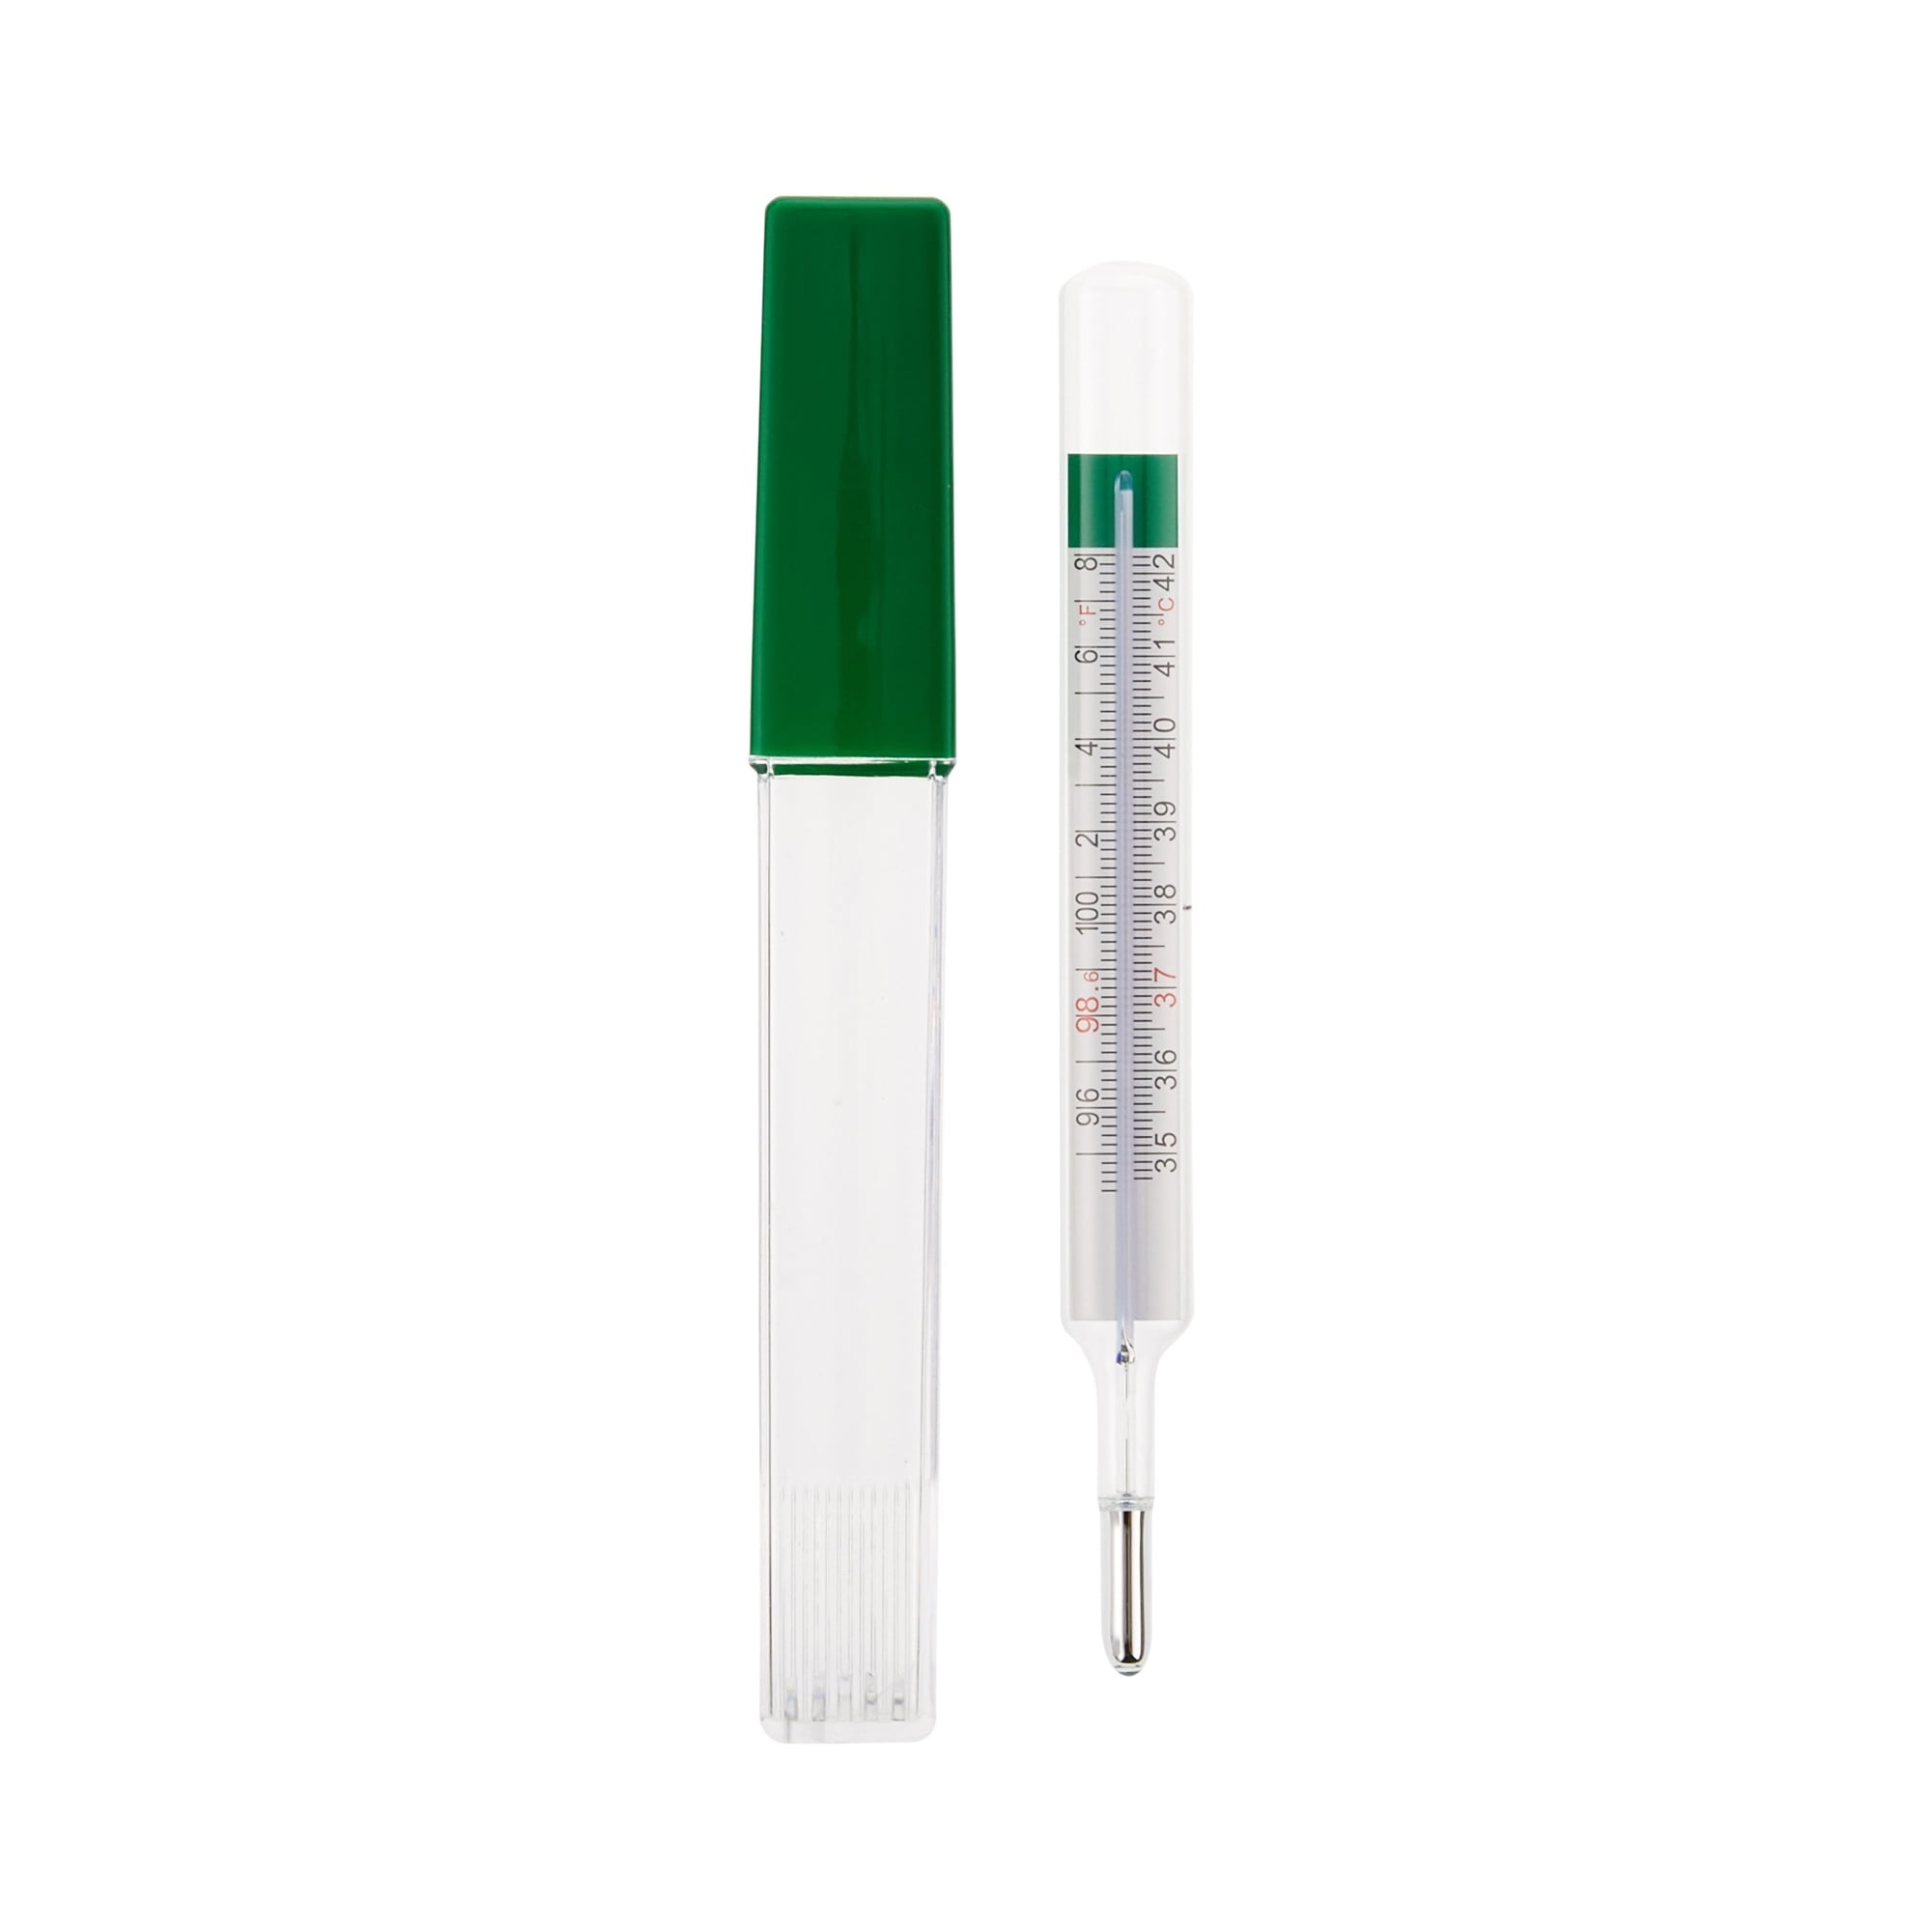 1× MERCURY-FREE Hospital Testing Equipment Clinical Bar Glass Thermometer 